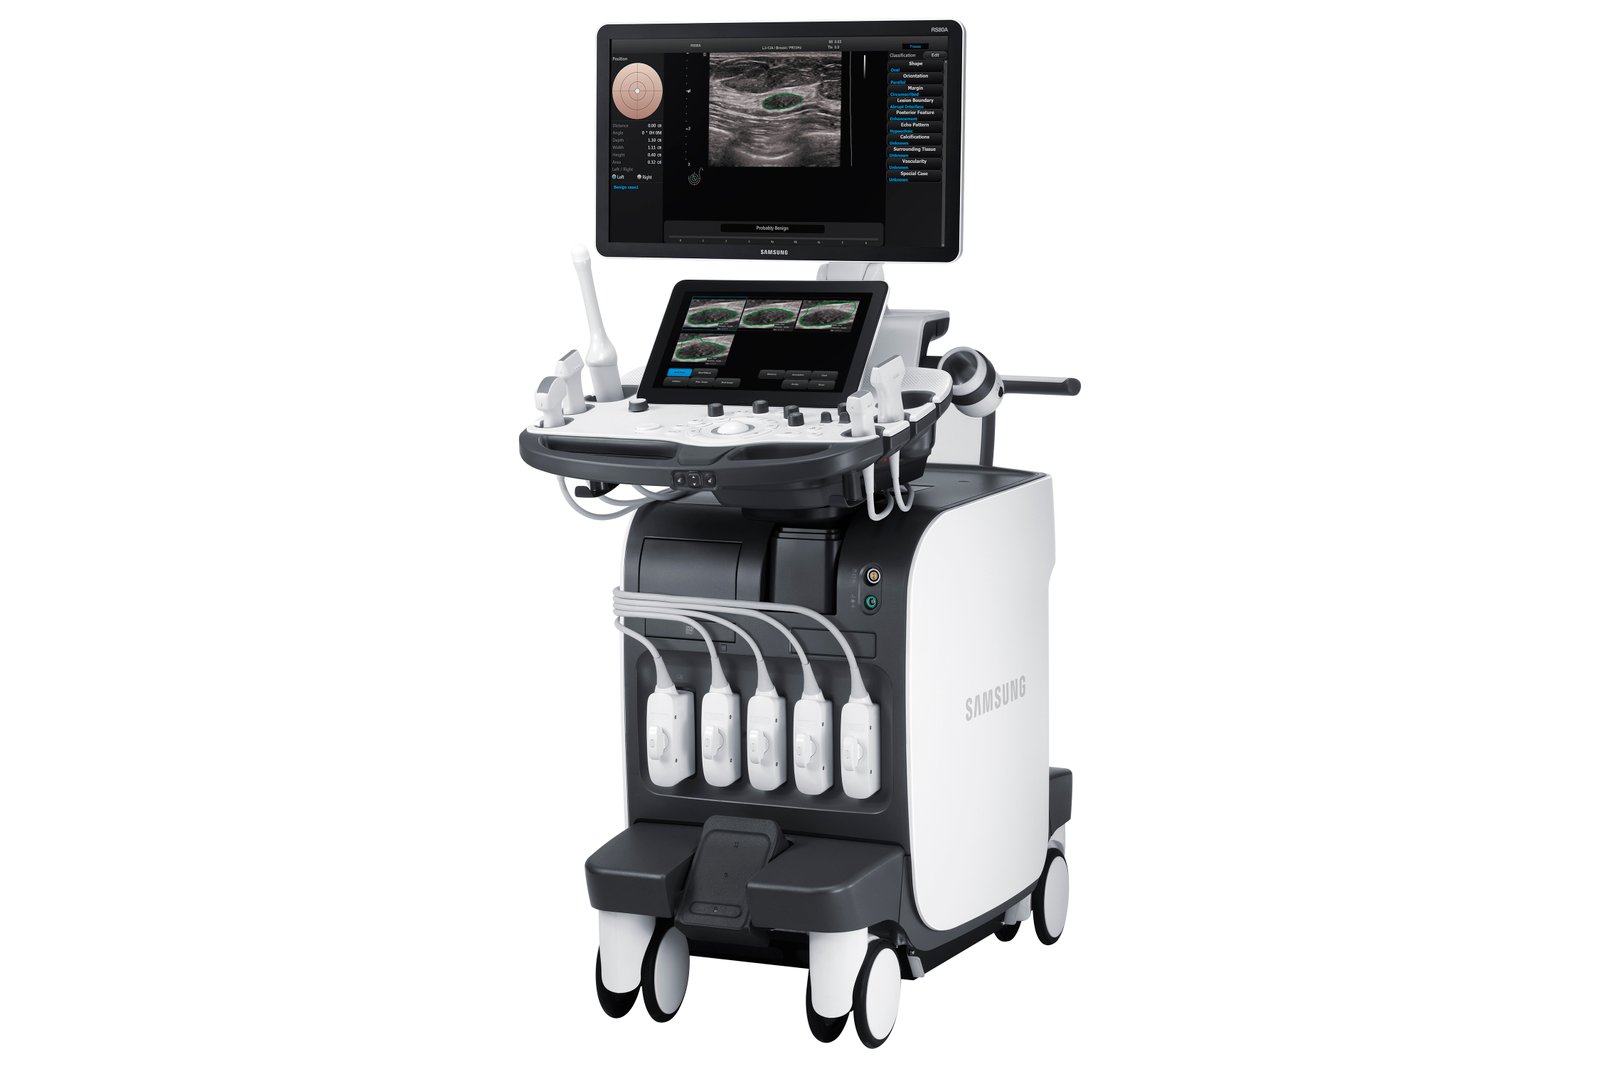 Samsung's new RS80A with Prestige launched in India on July 21, 2015, boosts diagnostic confidence with advanced clinical features for radiology market.